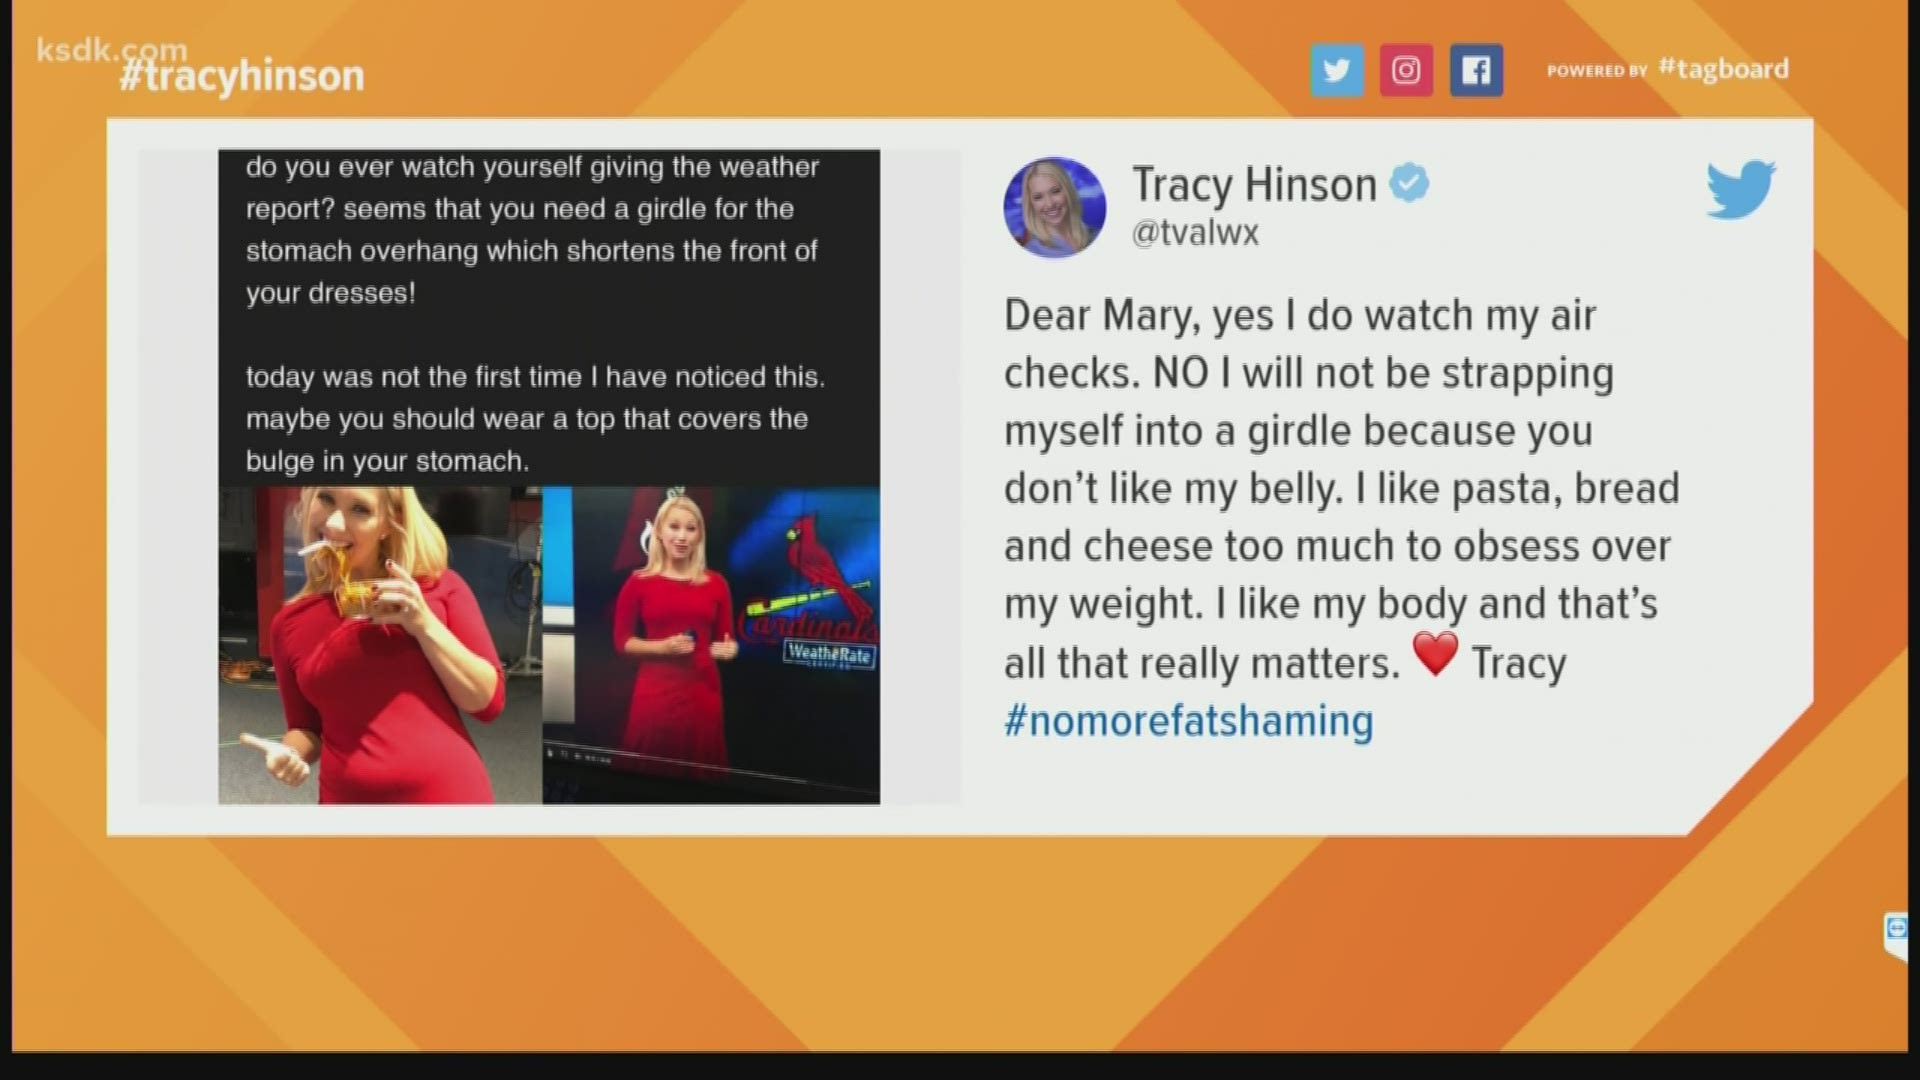 5 On Your Side's Tracy Hinson had the perfect response to a body-shamer.